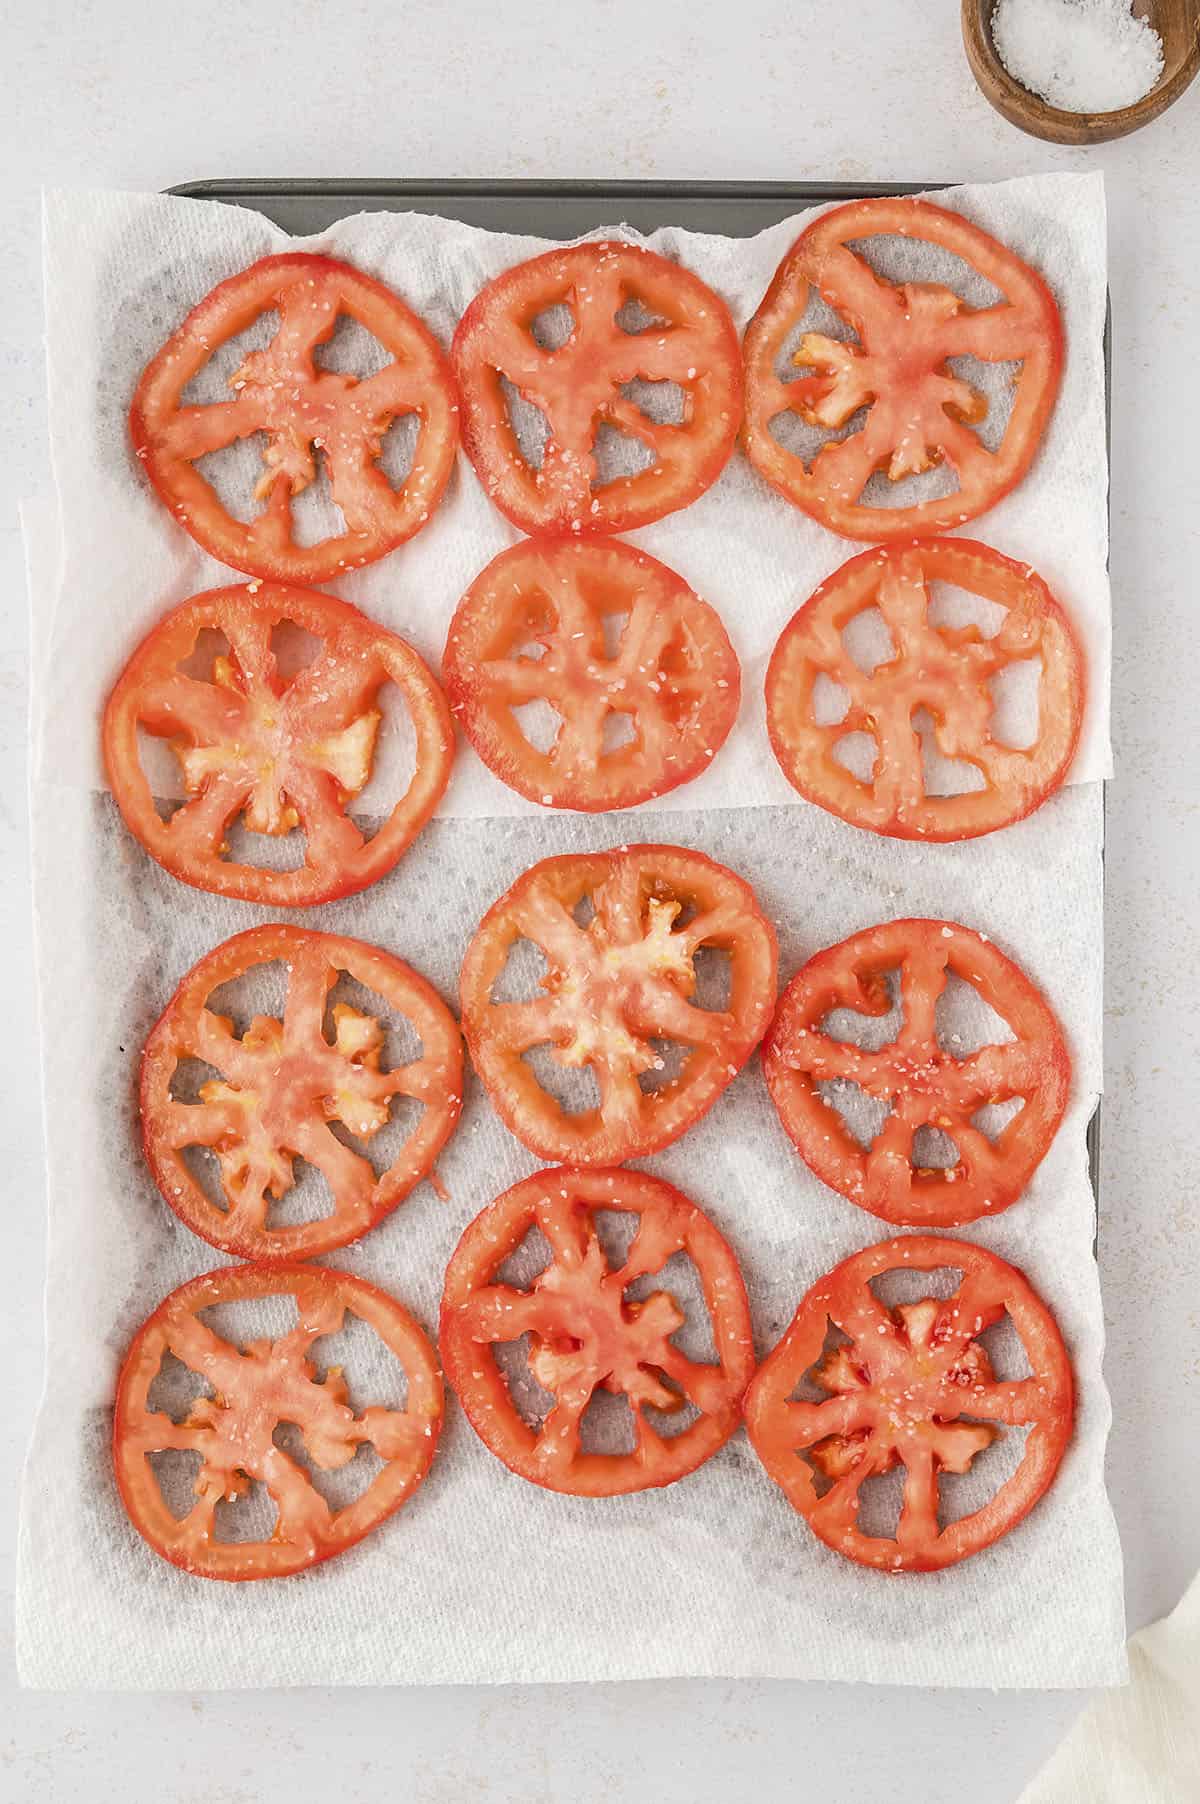 Sliced tomatoes on paper towel lined baking sheet.